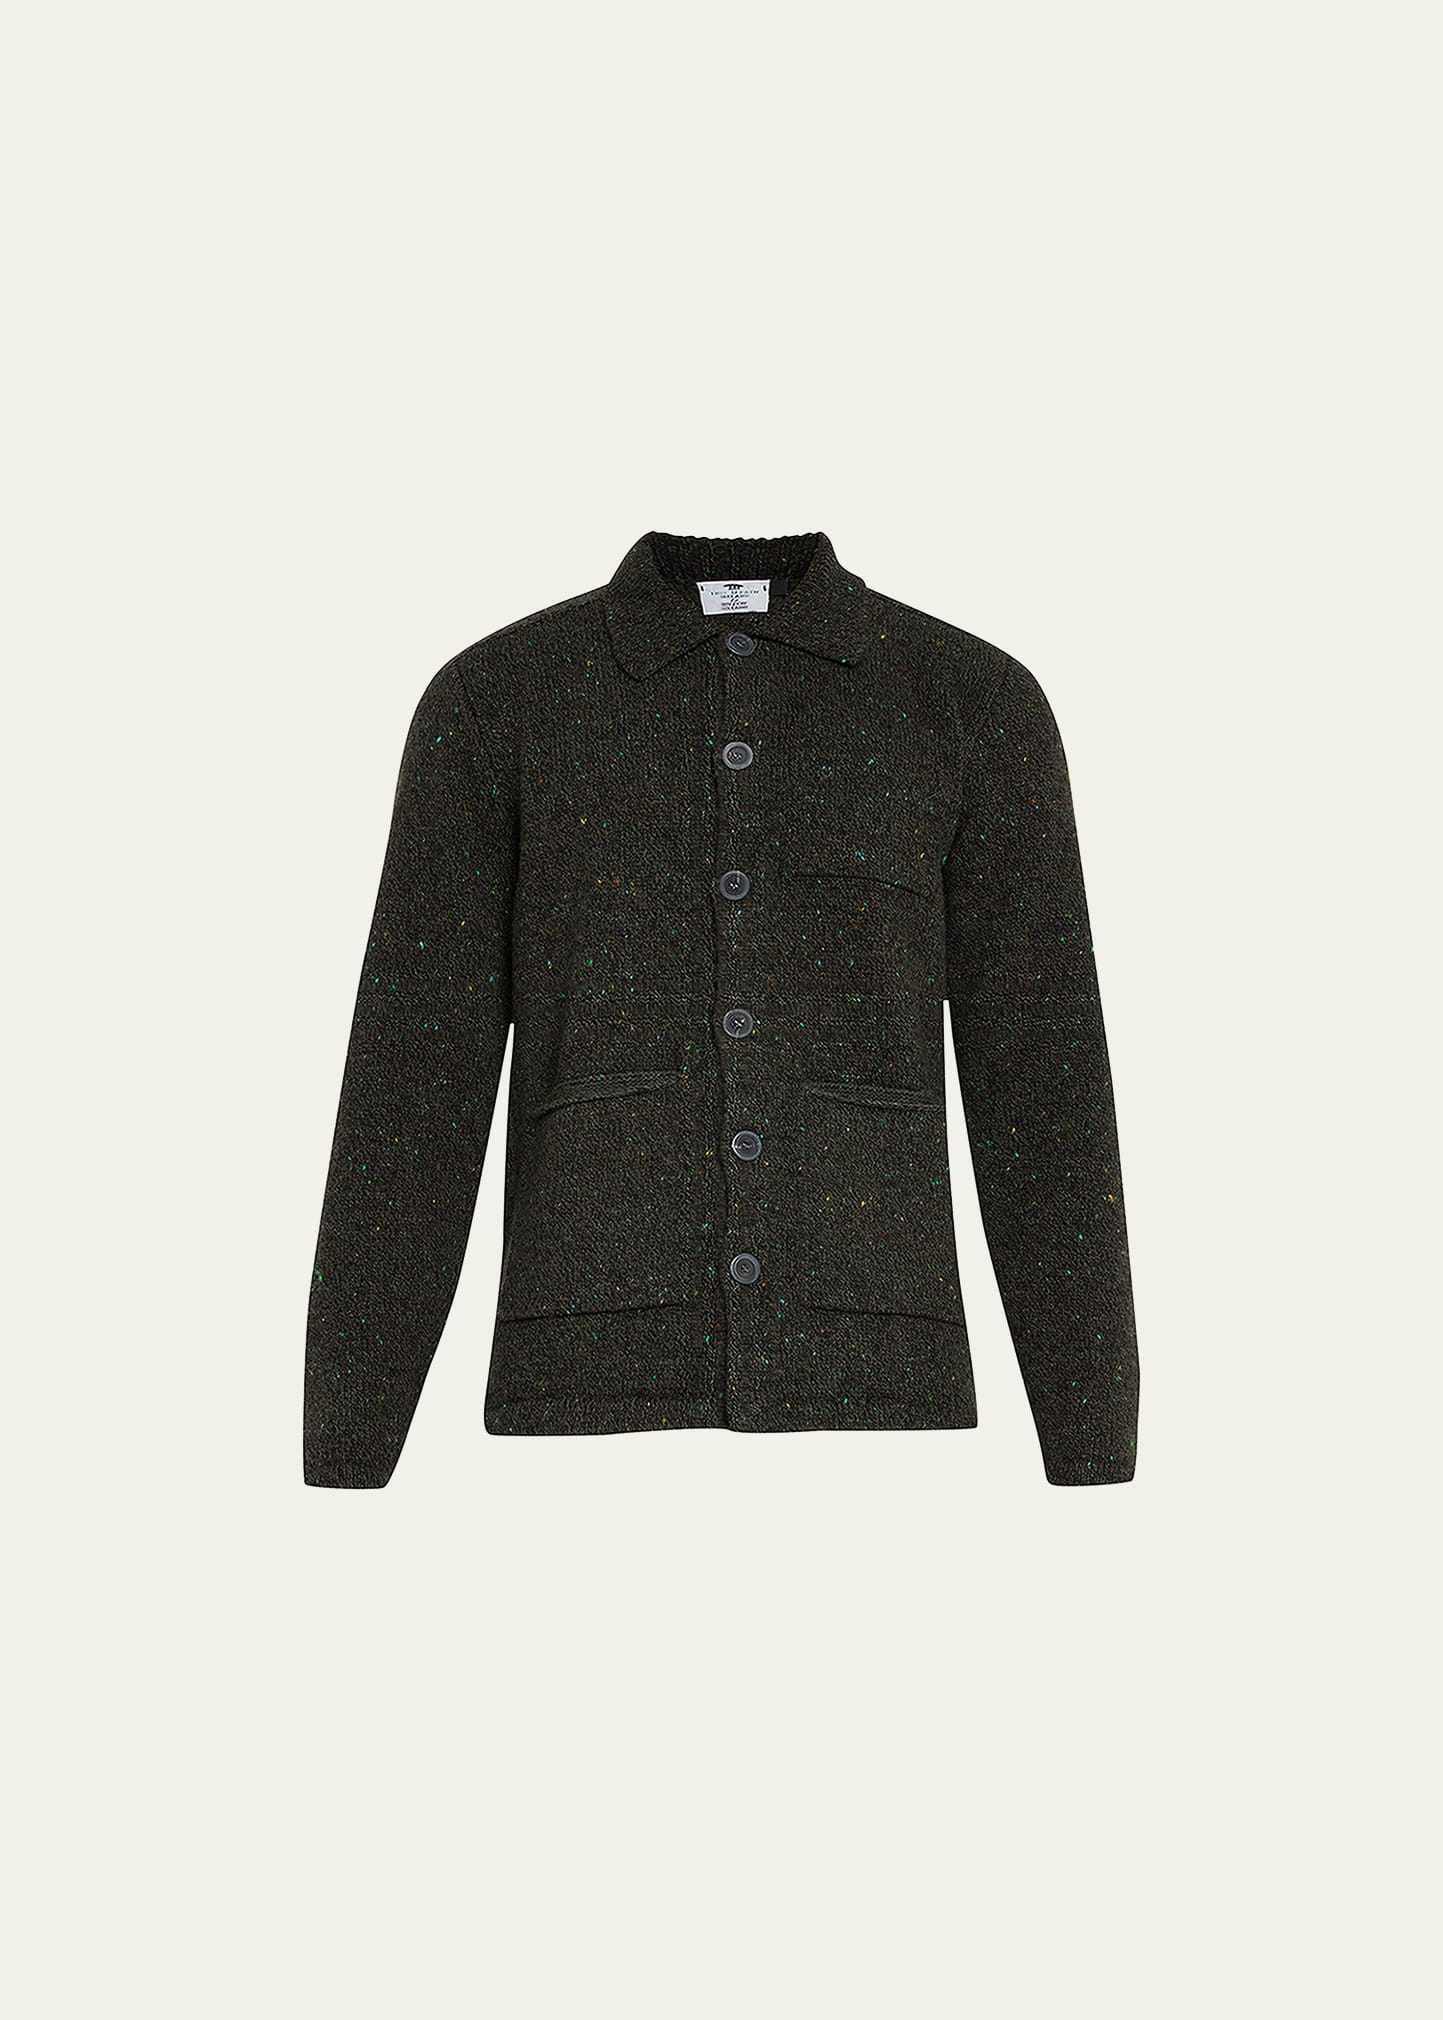 Inis Meain Men's Wool-Cashmere Button-Front Jacket